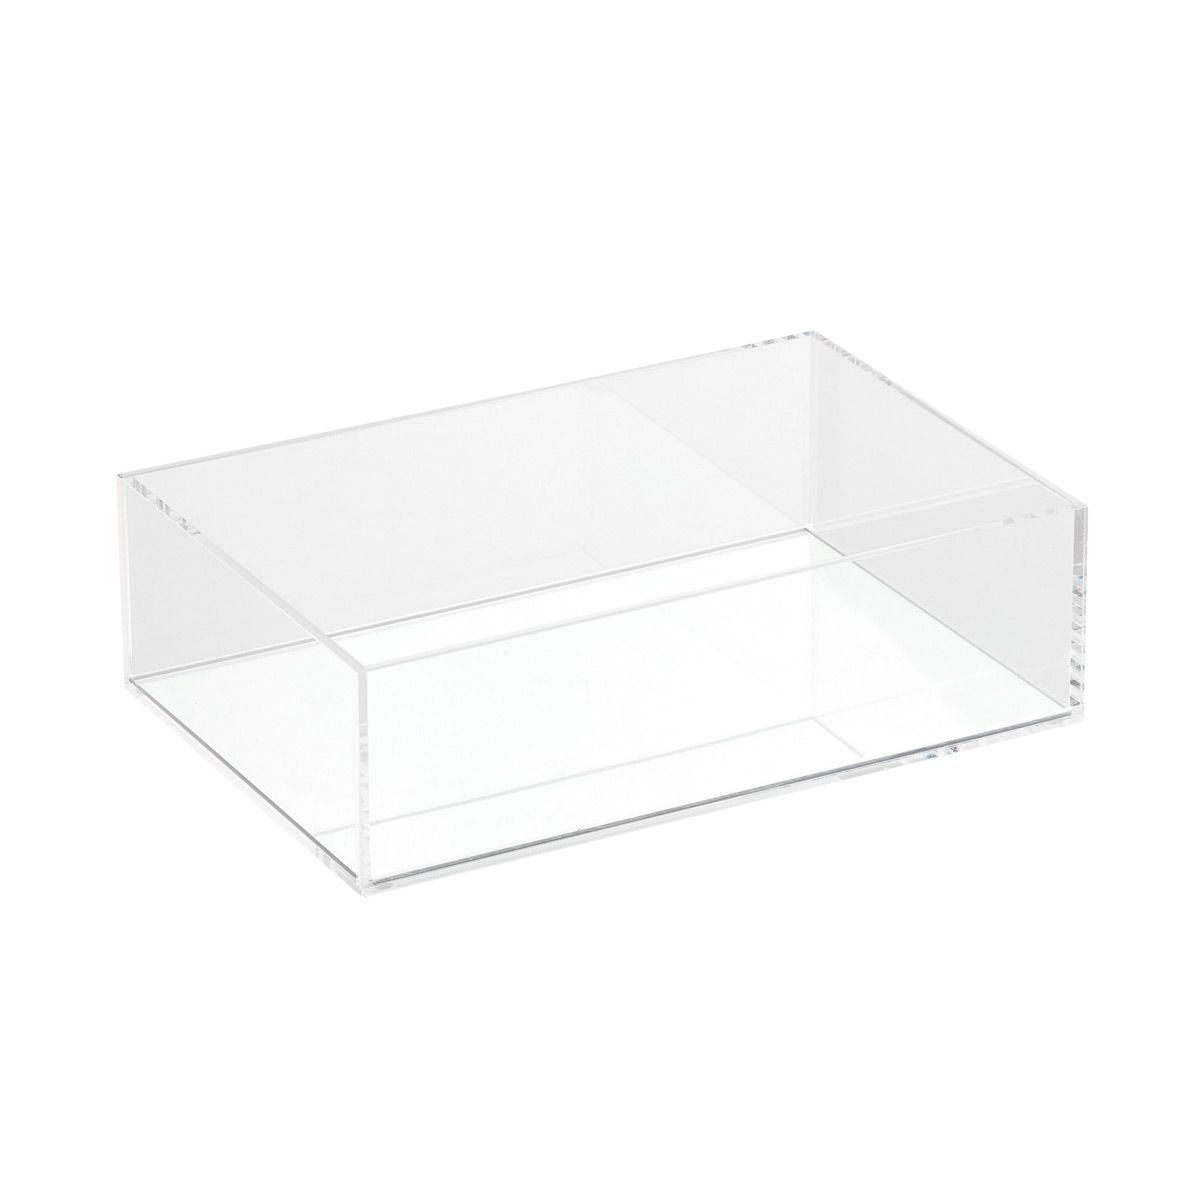 Modular Tray w/ Mirror Base | The Container Store